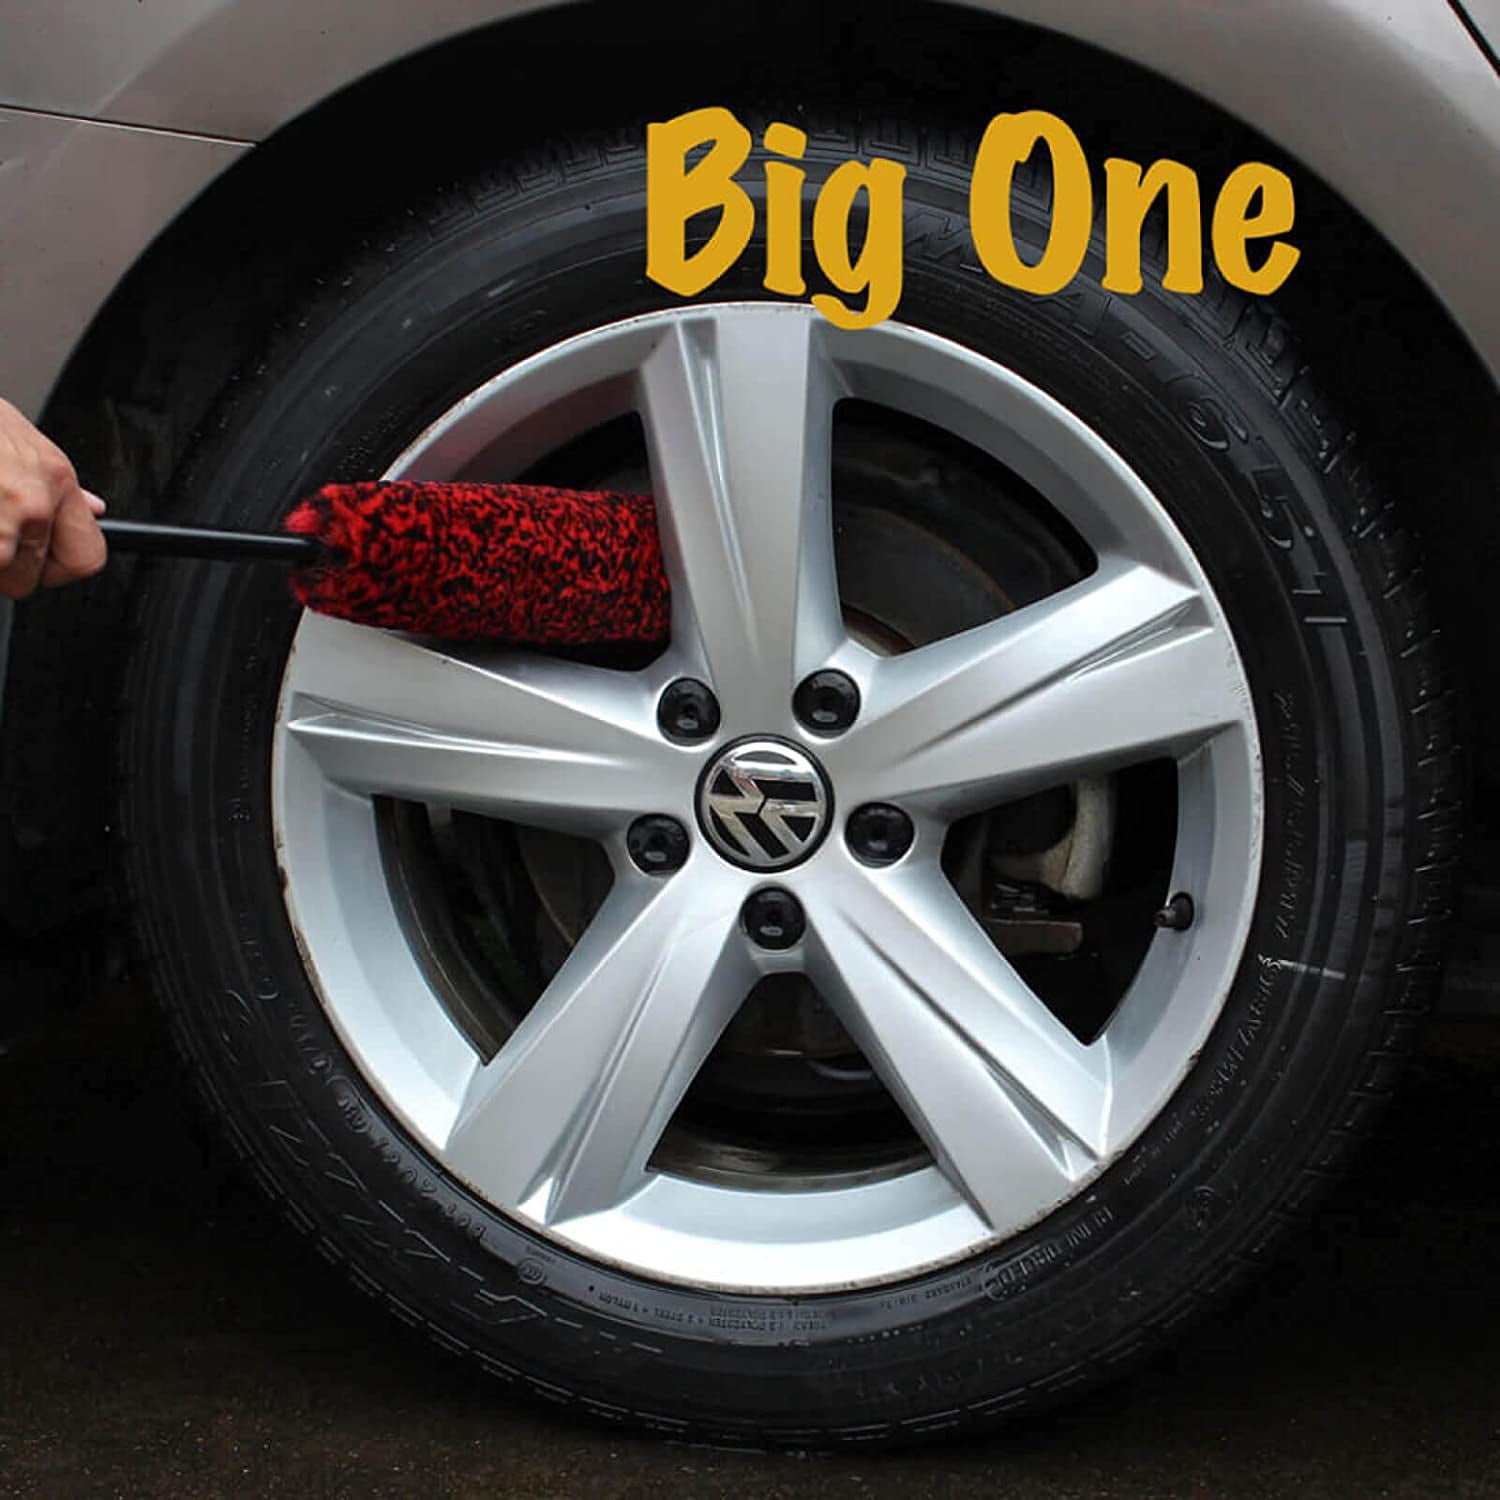 clean world industry Metal Free Wheel Cleaner Brush - Synthetic Wool Car  Cleaning Brush Highly Absorbent Tire